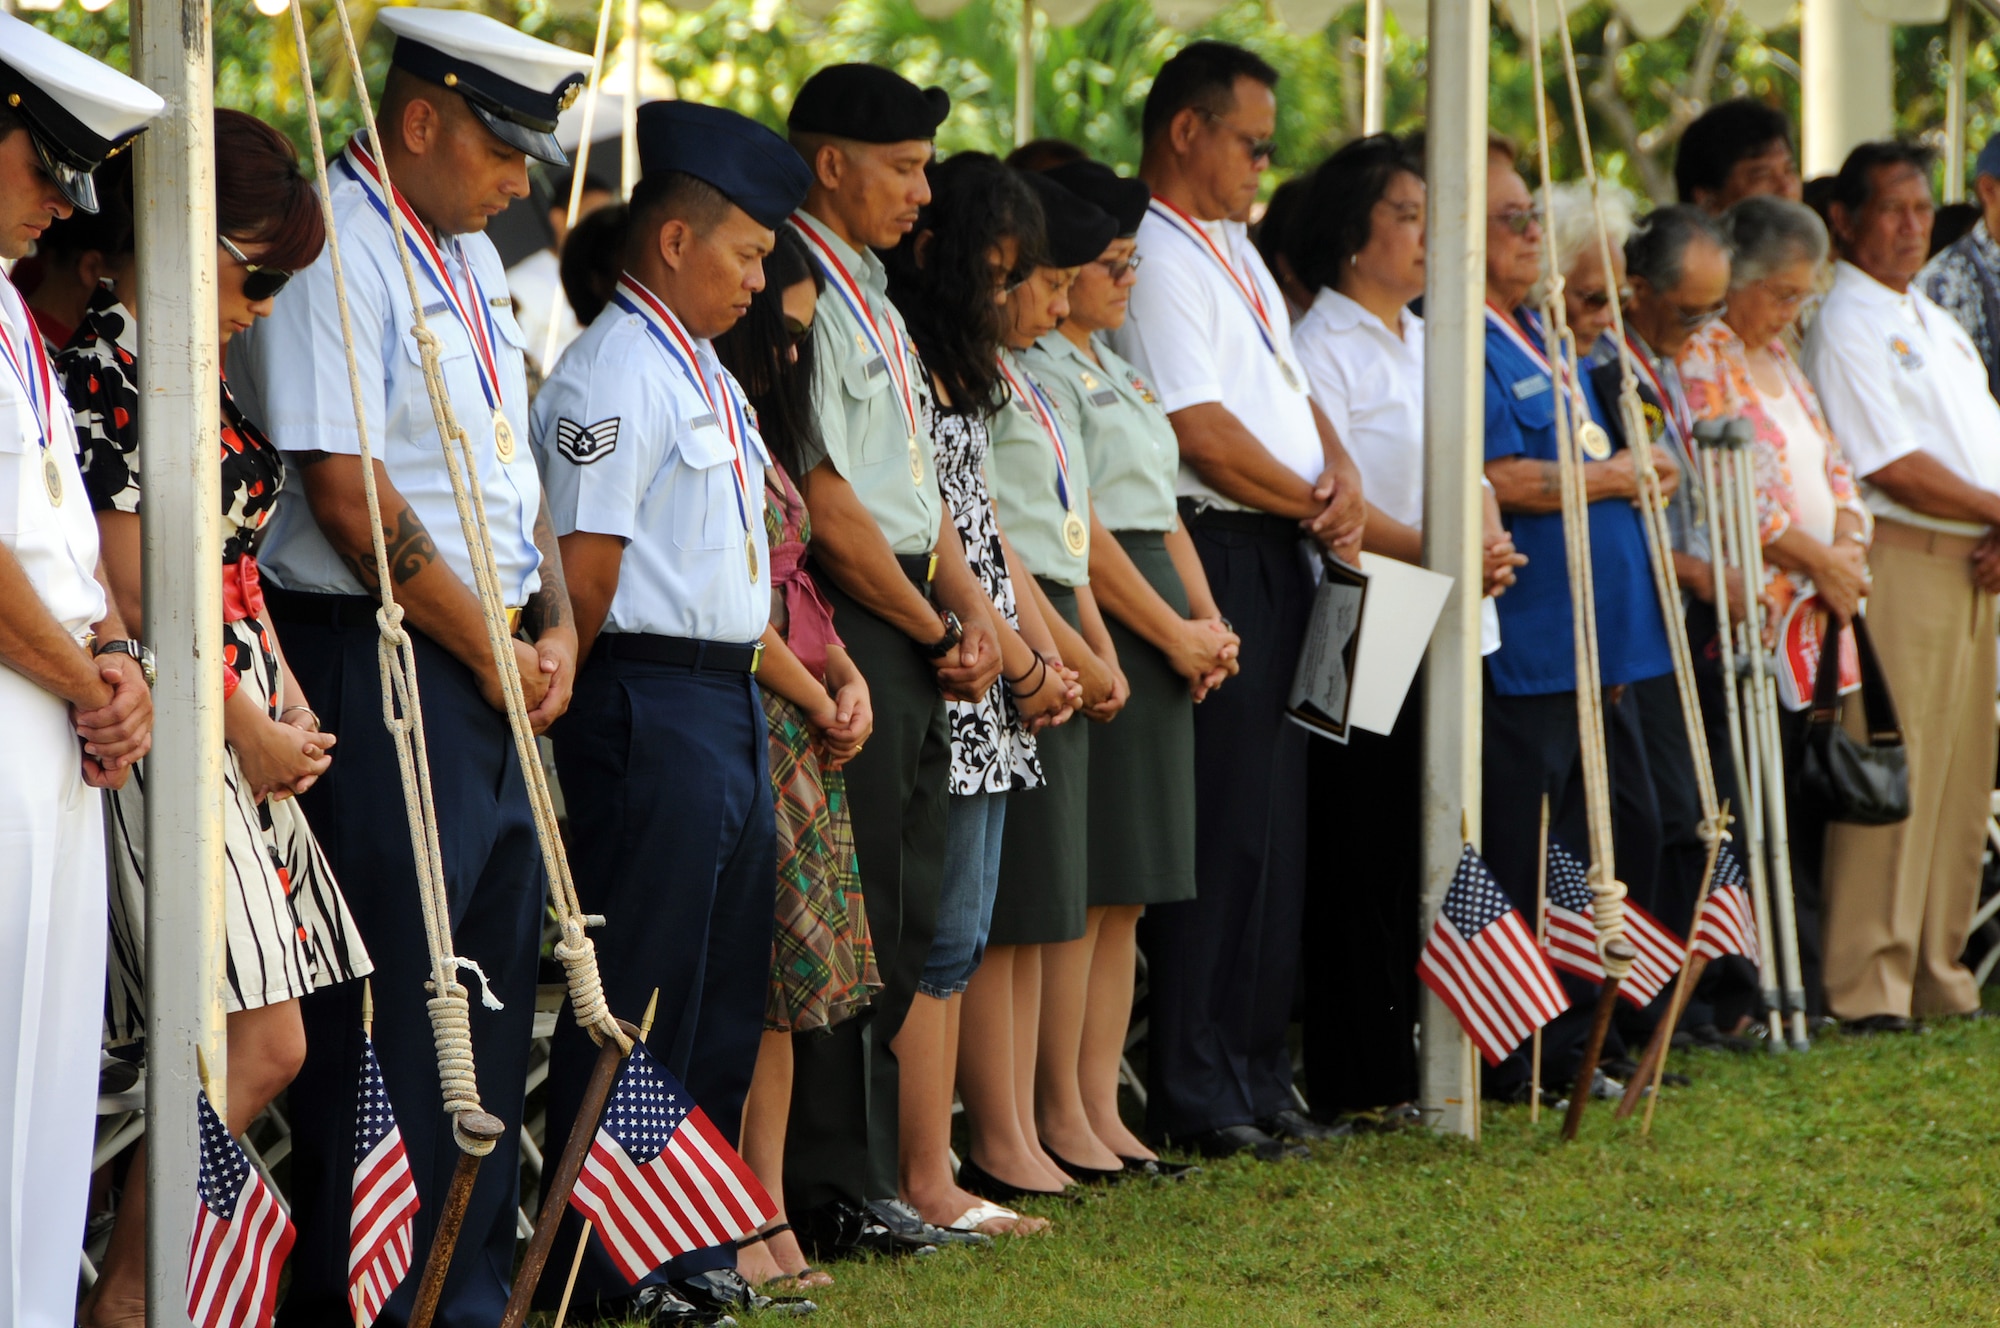 ANDERSEN AIR FORCE BASE, Guam - The crowd observes a moment of silence to remember those who have fallen in the line of duty during the the Veterans Day Ceremony at the Ricardo J. Bordallo Governors Complex in Adelup, Guam Nov. 11. Admiral French reminded us never forget those who gave us our nation, those who defended it and those who preserve it. Let not their uncommon valor be commonly forgotten. (U.S. Air Force photo by Airman 1st Class Courtney Witt)
